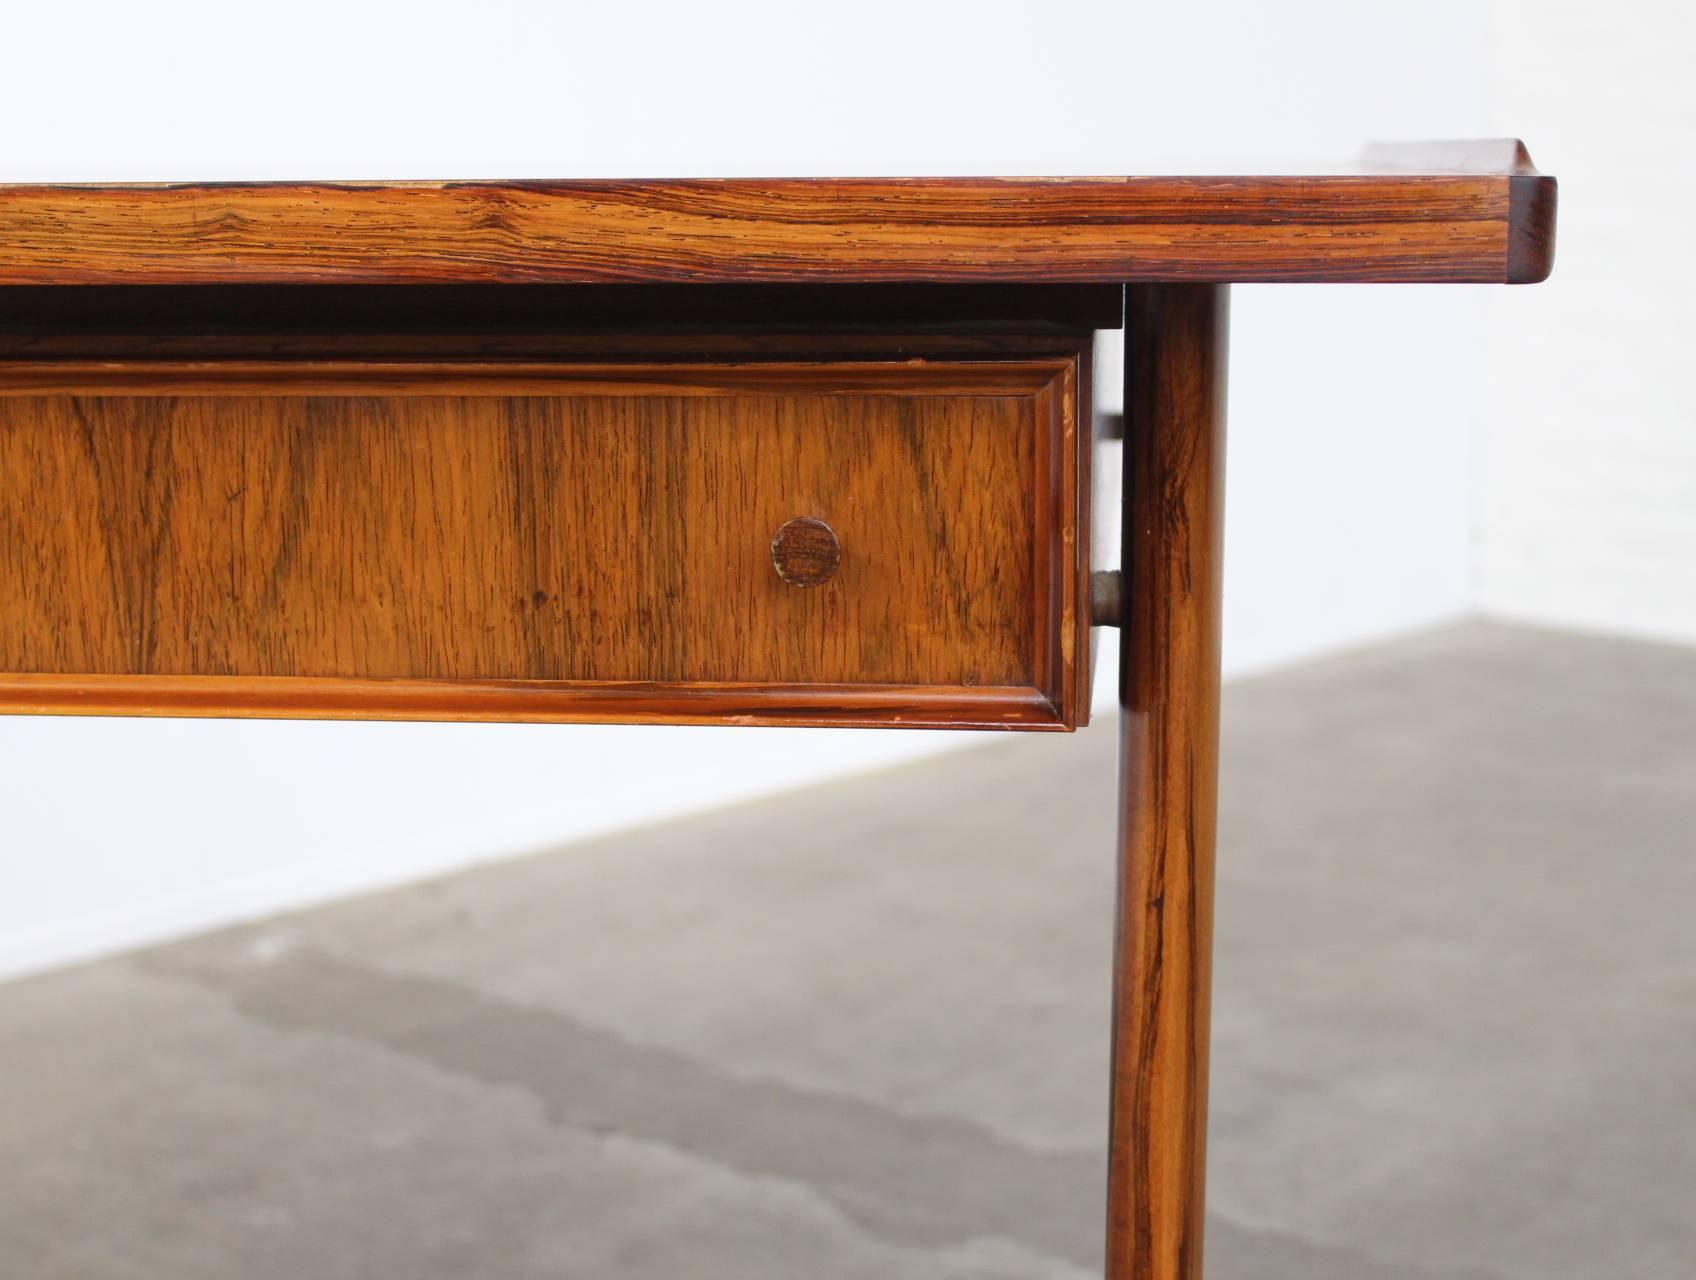 Very elegant rosewood writing desk in the manner of Arne Vodder with two asymetrical drawers that hang below the desk top. The wood used is a beautiful flaming Brazilian rosewood and it has some nice details like the upstanding edges on the sides